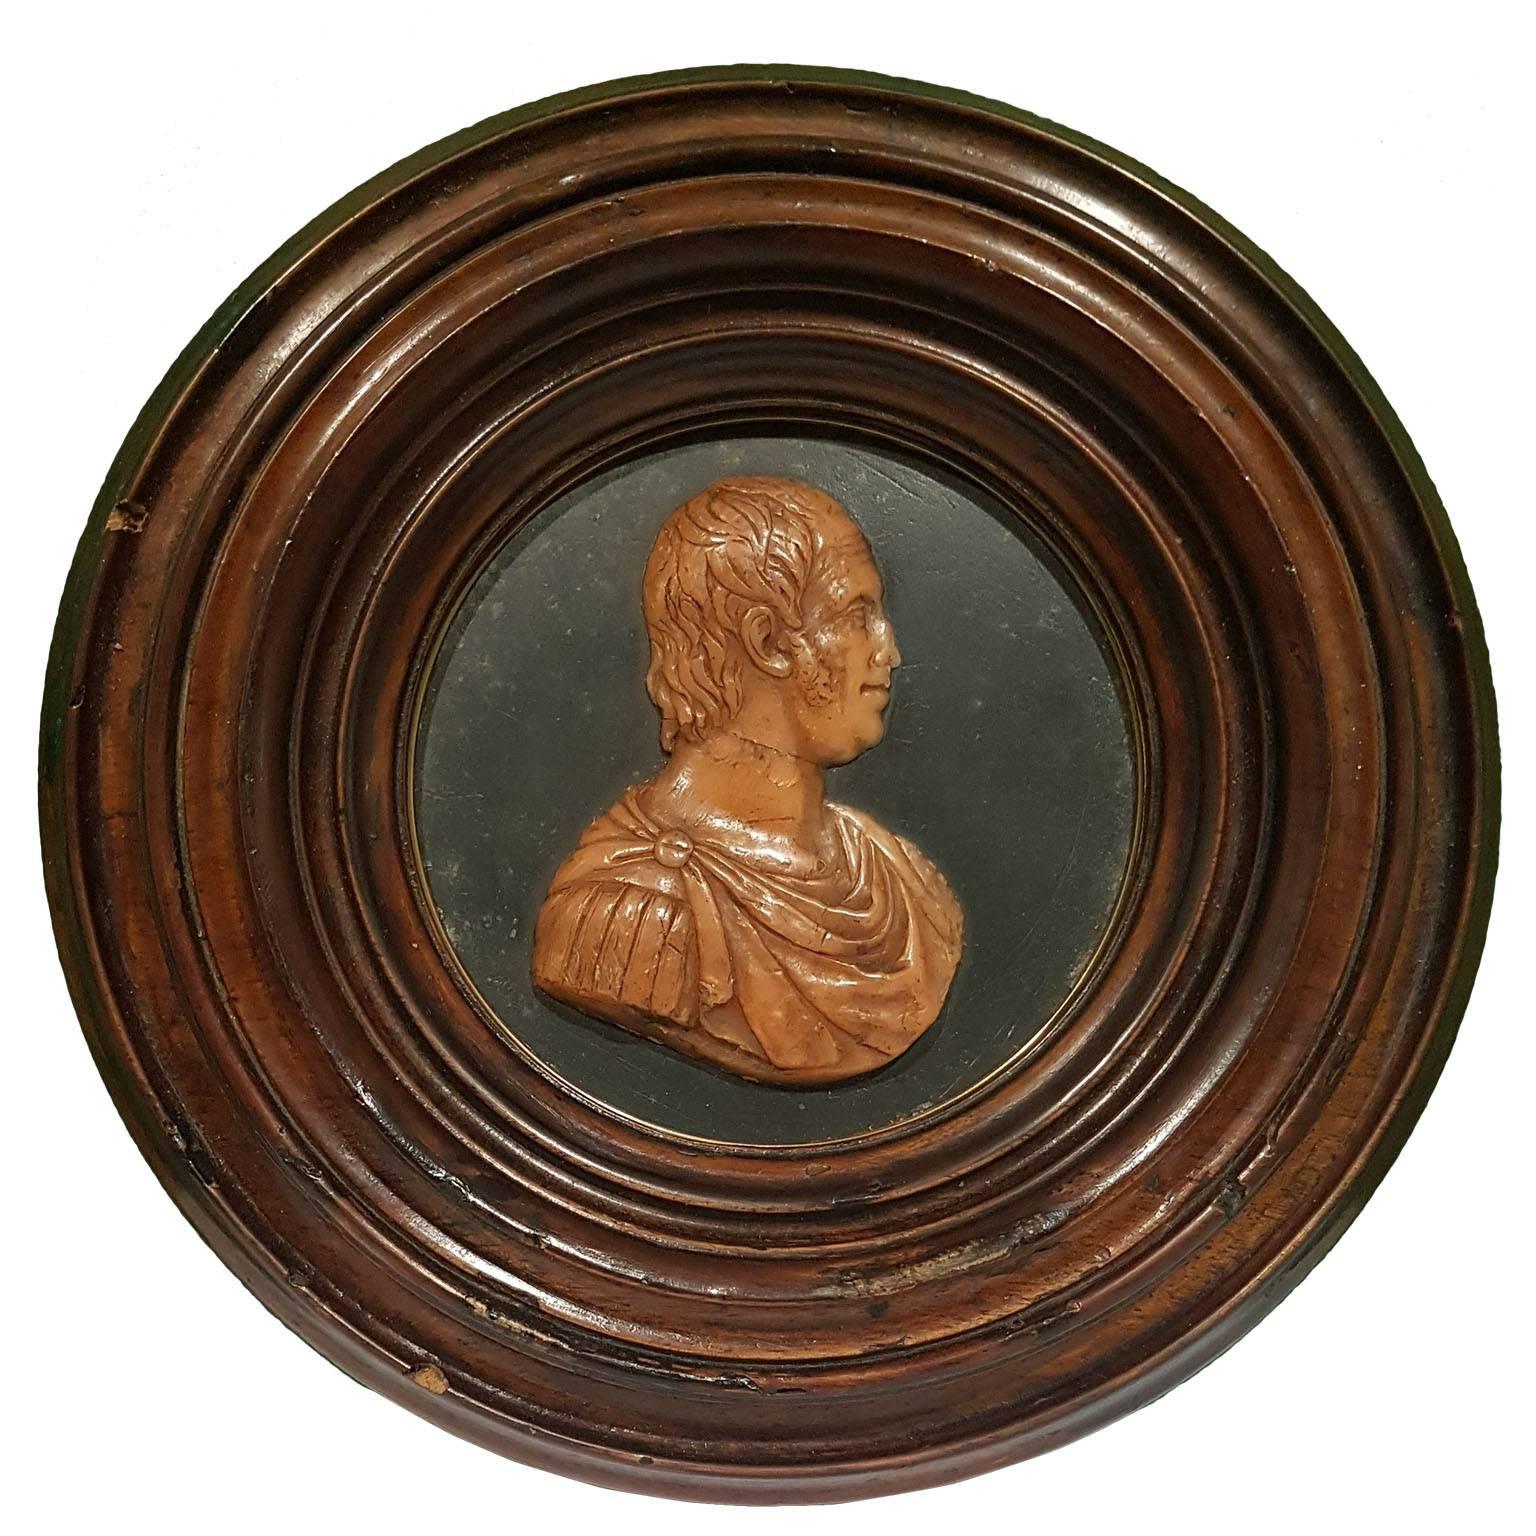 Low relief with Ferdinando IV Borbone' profile as a Roman Emperor, made by patterned wax and coated by a circular walnut wood frame.

This product is located and shipped from Italy.